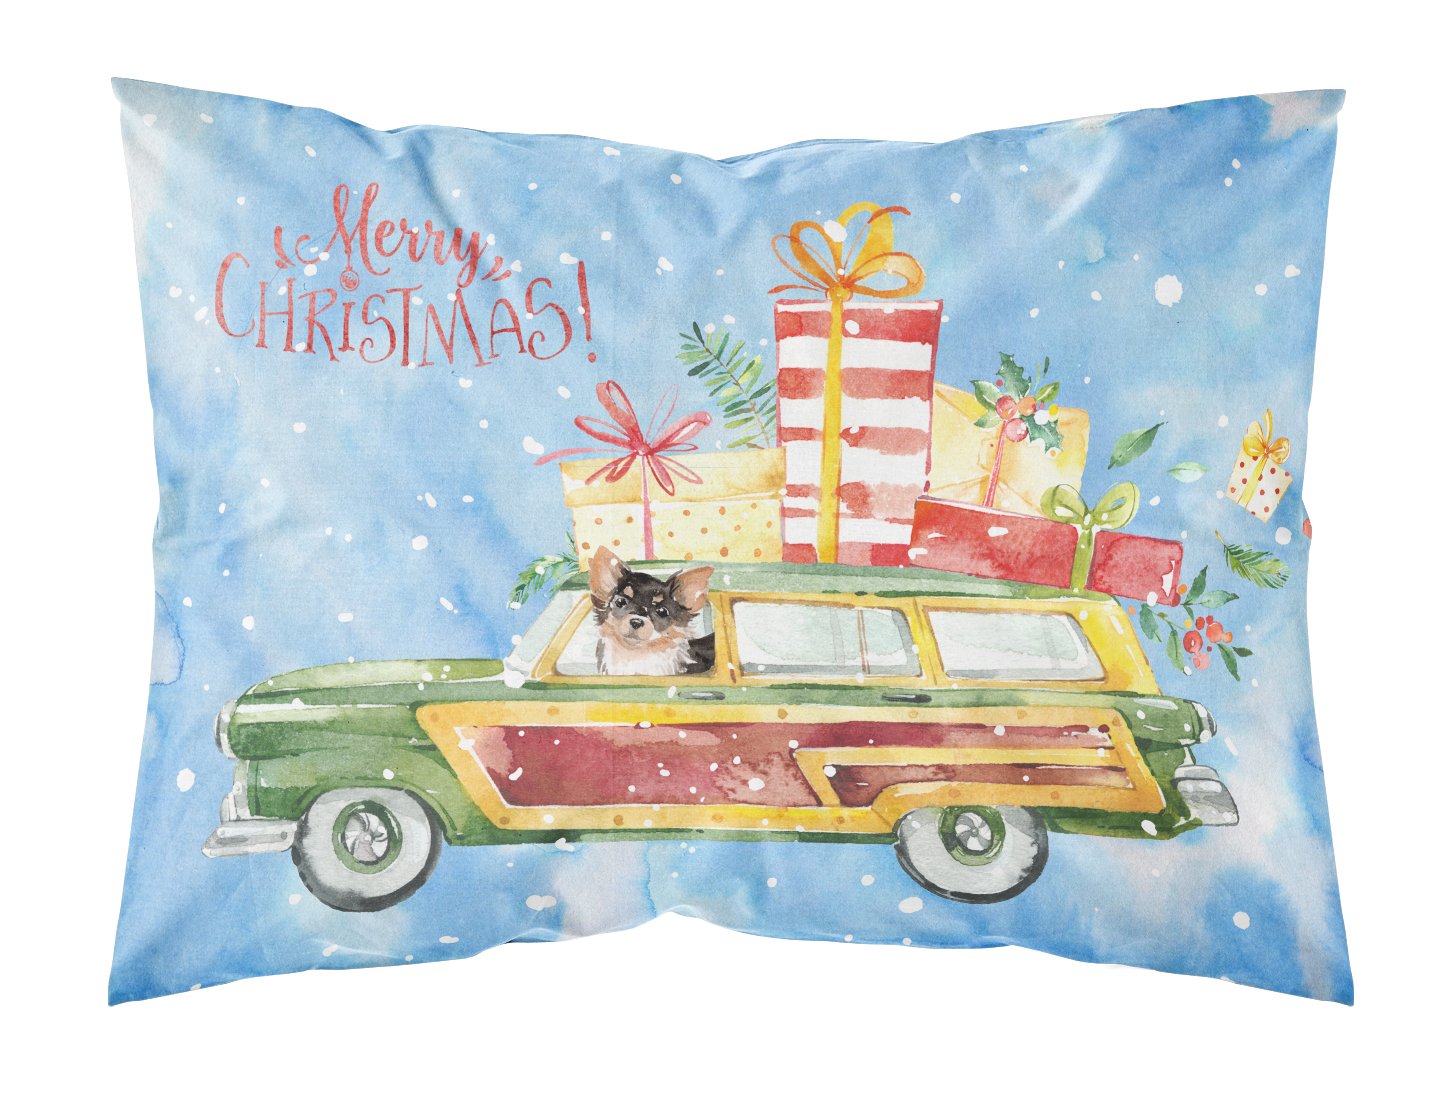 Merry Christmas Long Haired Chihuahua Fabric Standard Pillowcase CK2460PILLOWCASE by Caroline's Treasures